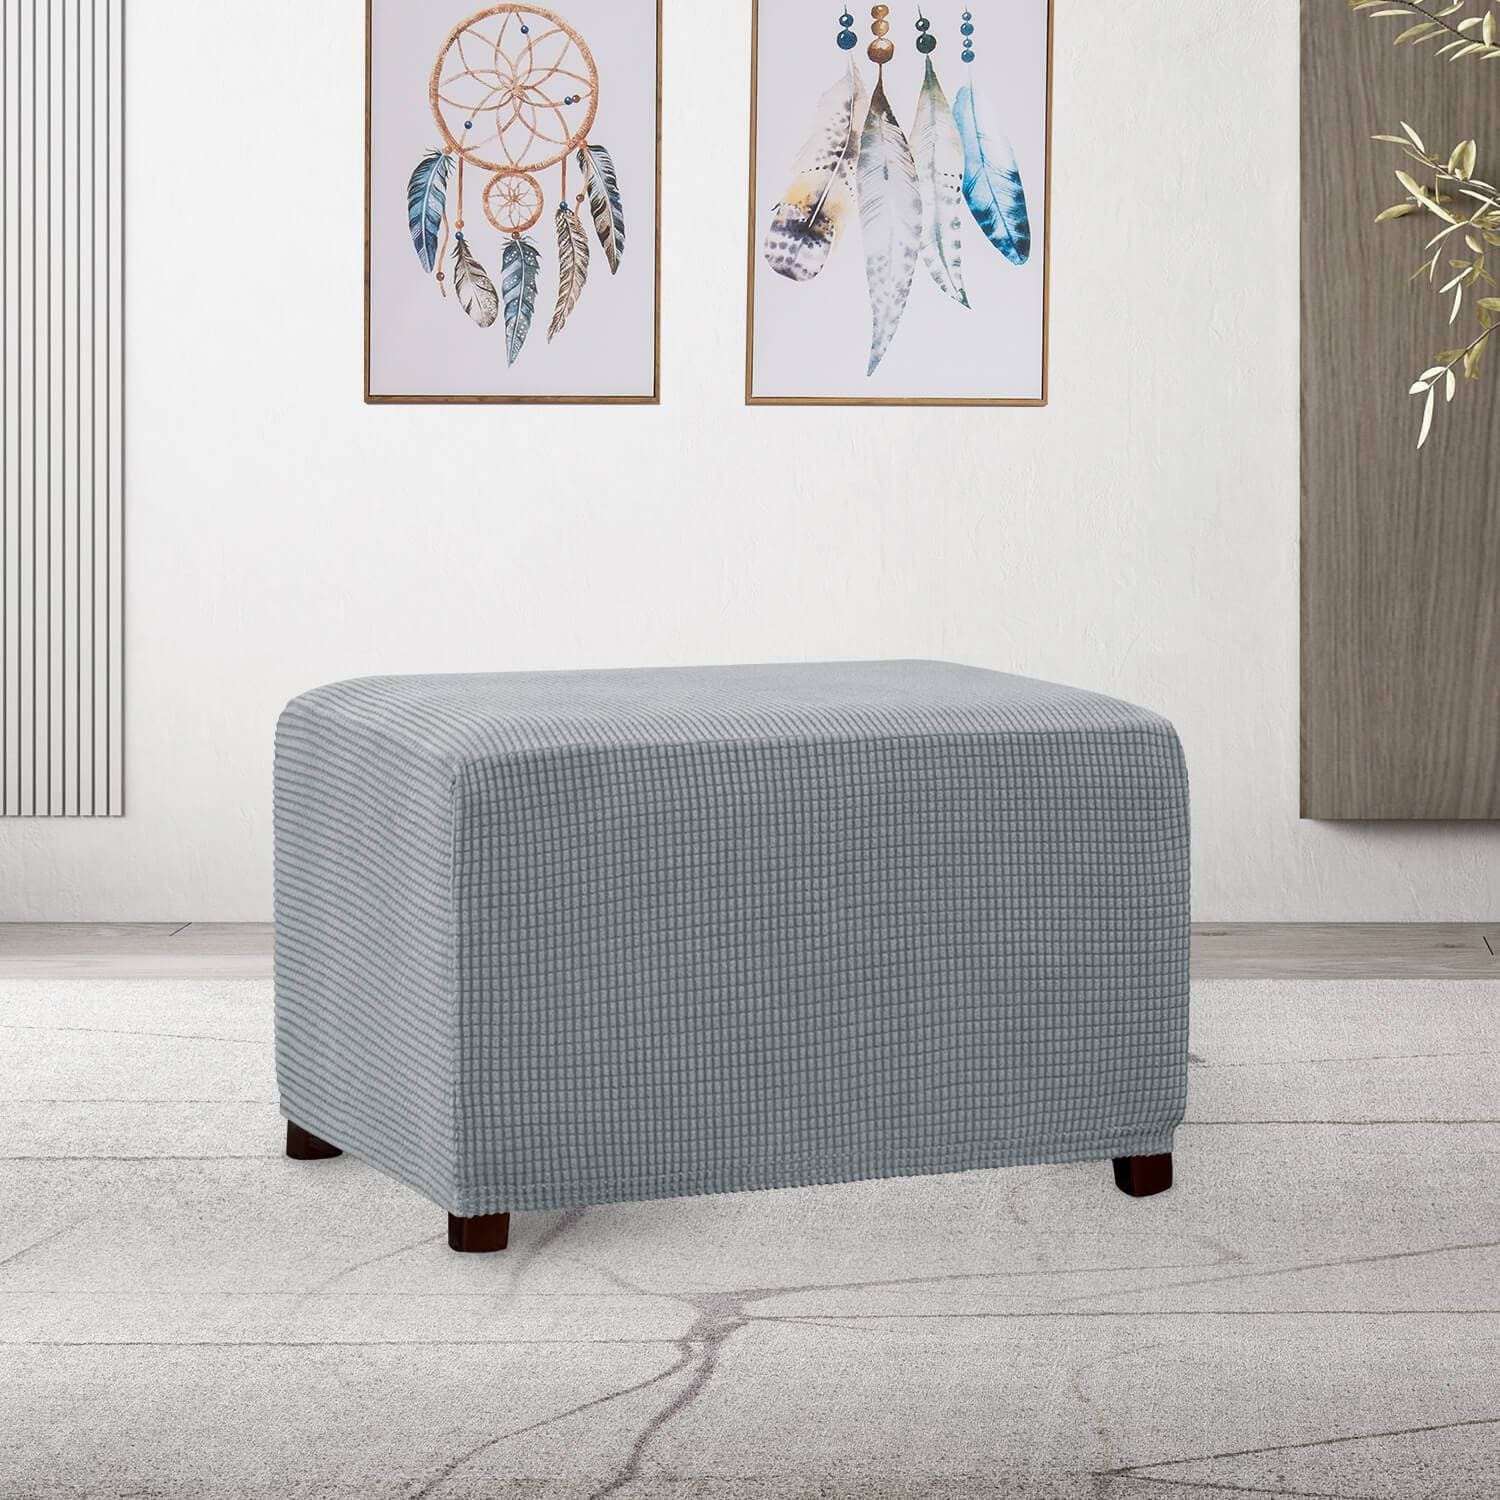 https://ak1.ostkcdn.com/images/products/is/images/direct/e5a8a289363b336f08df5963116acd3484d2816a/Subrtex-Stretch-Ottoman-Slipcover-Jacquard-Rectangular-Footstool-Cover.jpg